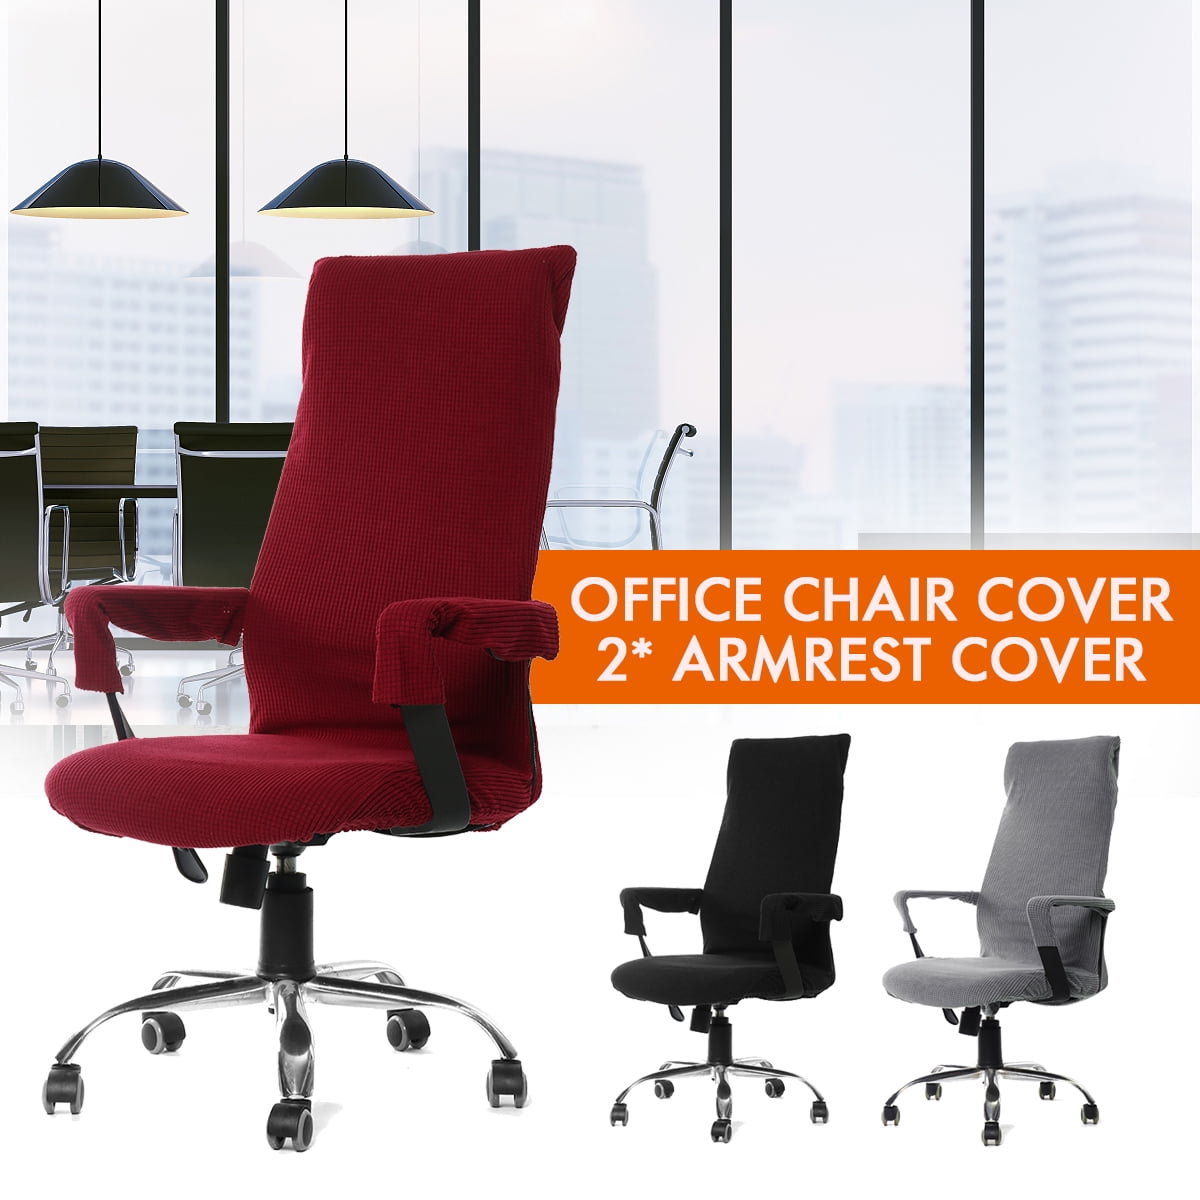 Details about   Office Swivel Seat Cover Printed Cushion Chair Covers Room Home Armchair Decor 